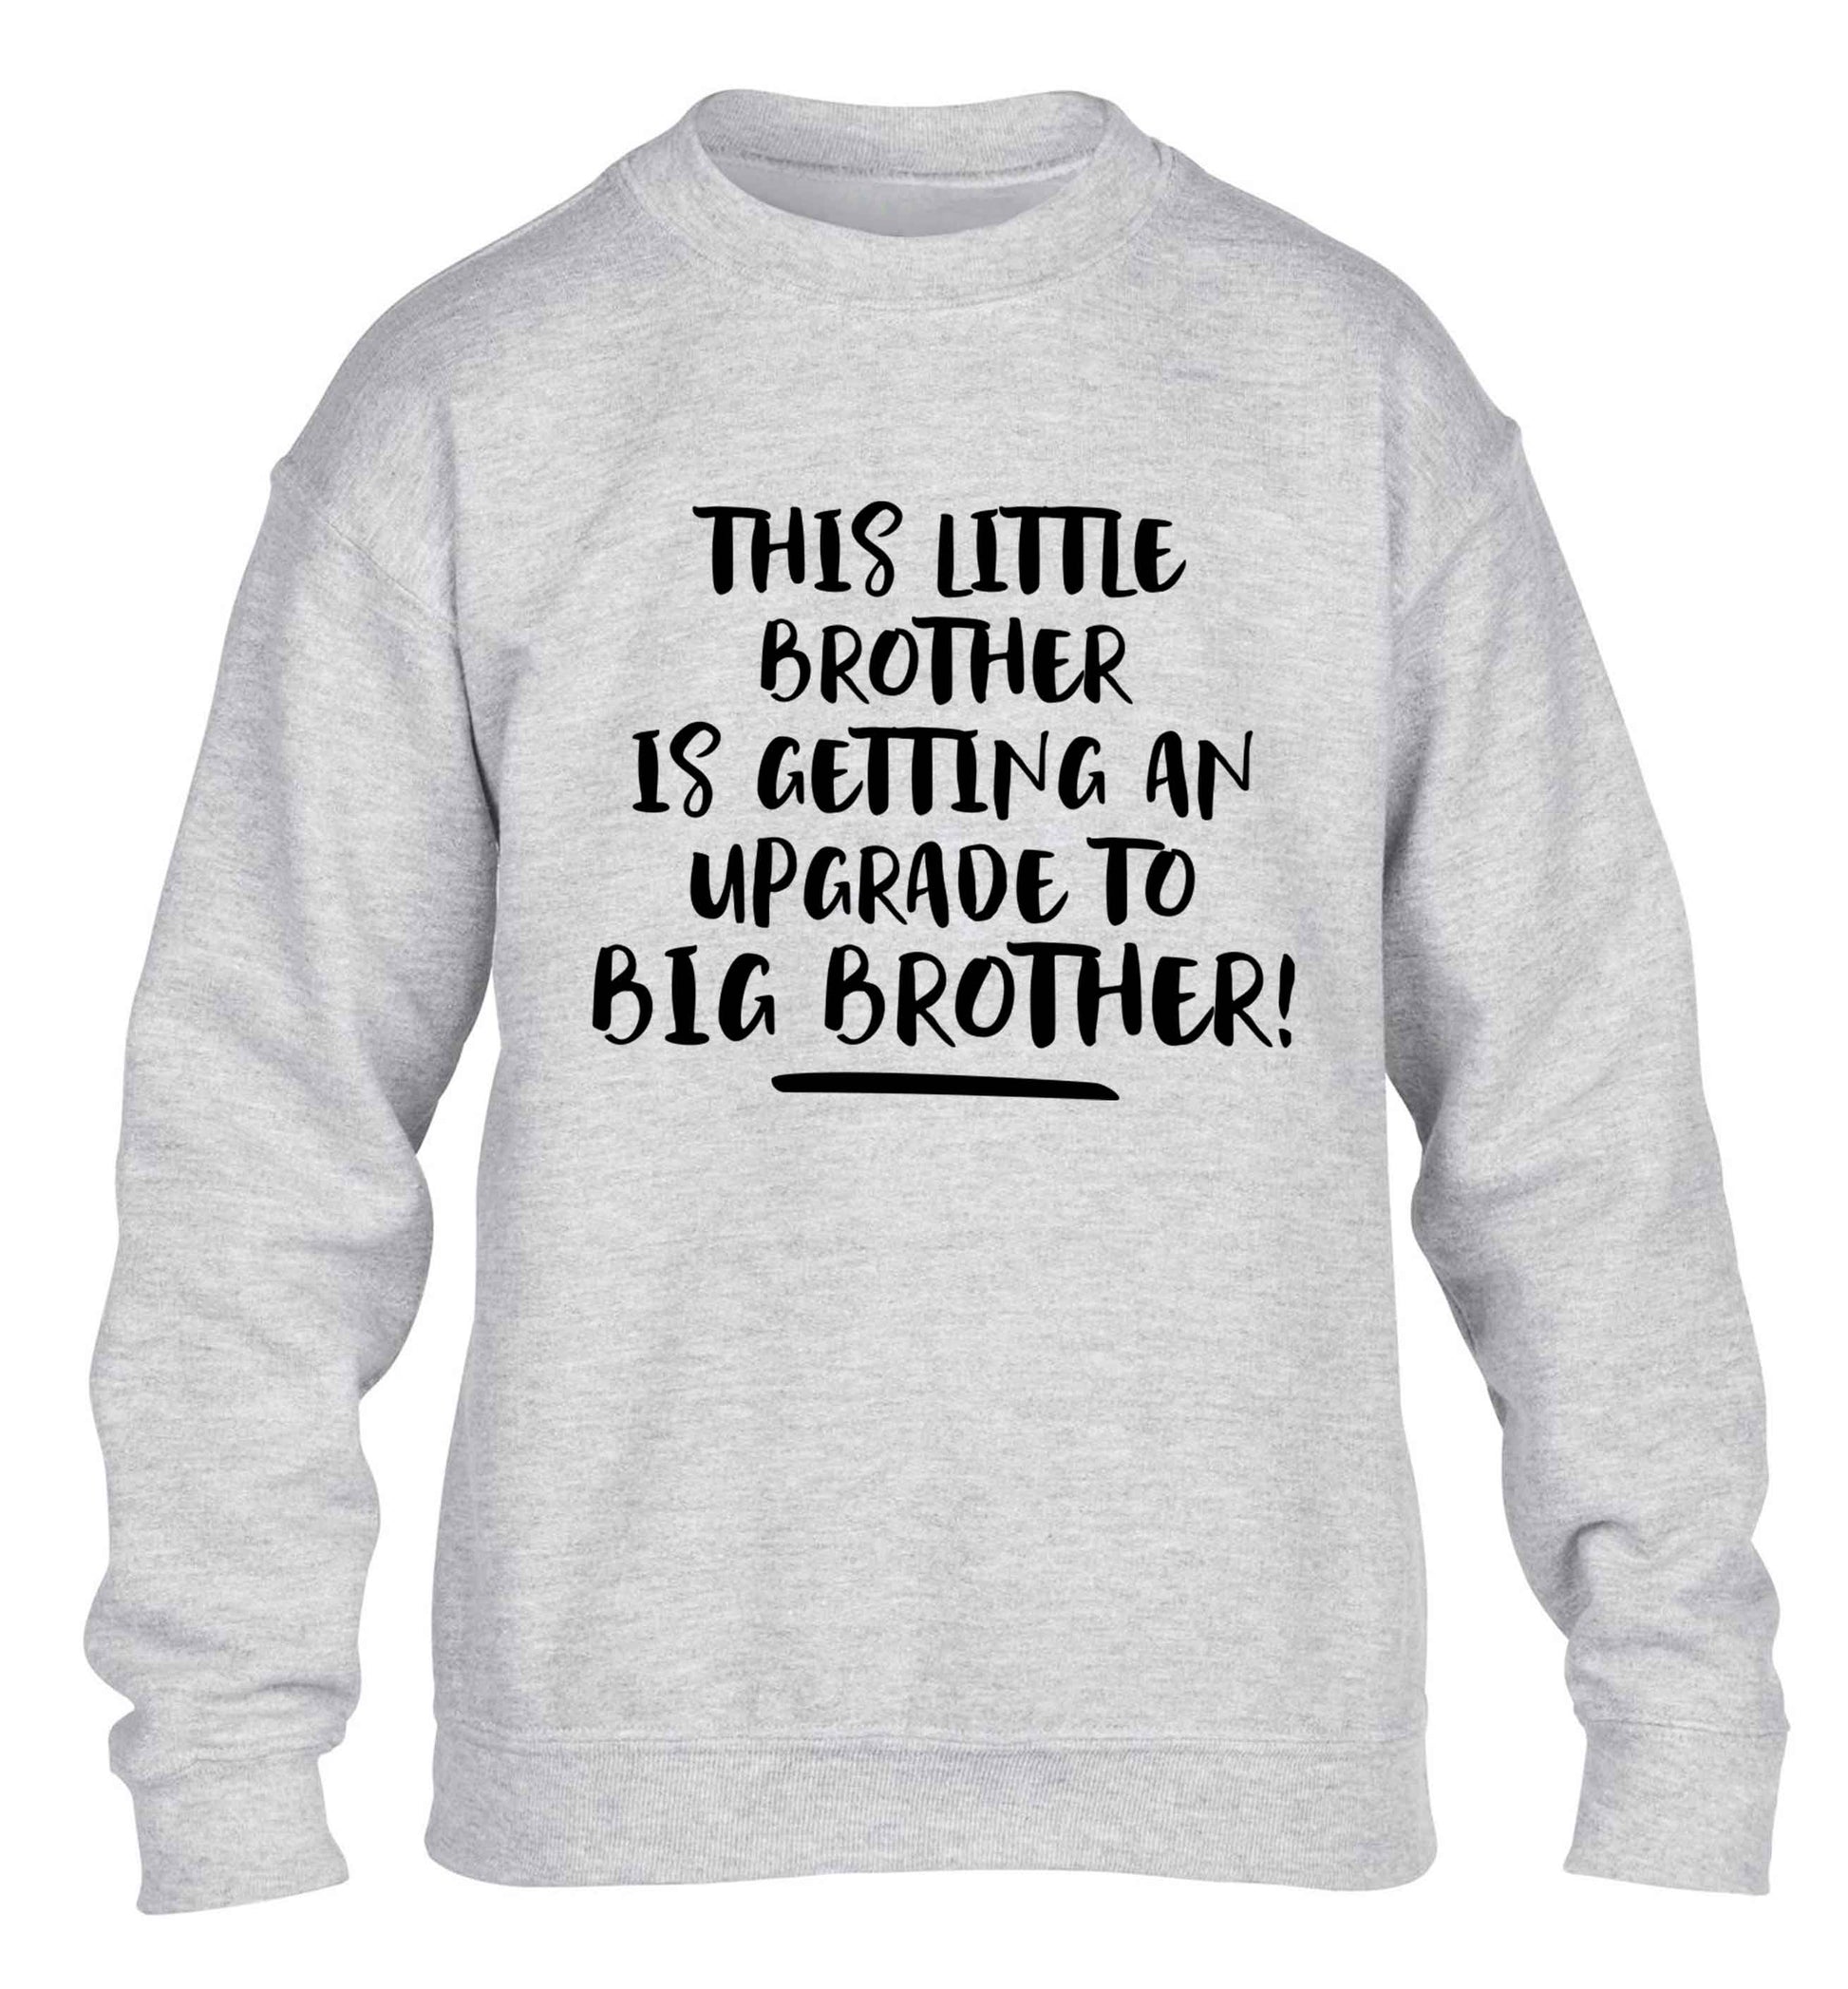 This little brother is getting an upgrade to big brother! children's grey sweater 12-13 Years